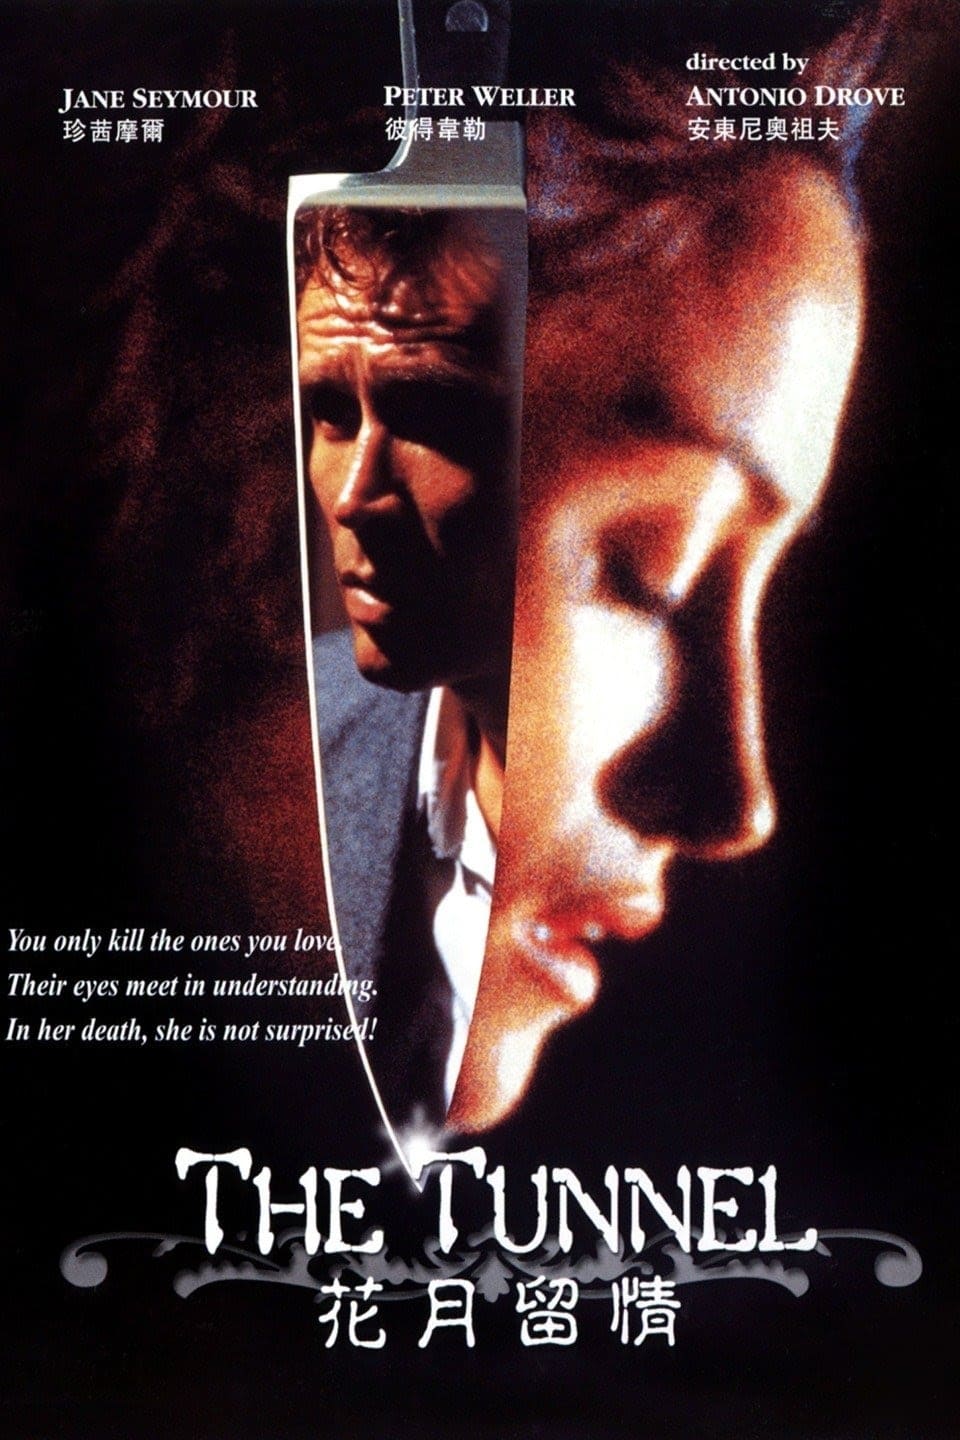 The Tunnel (1988)